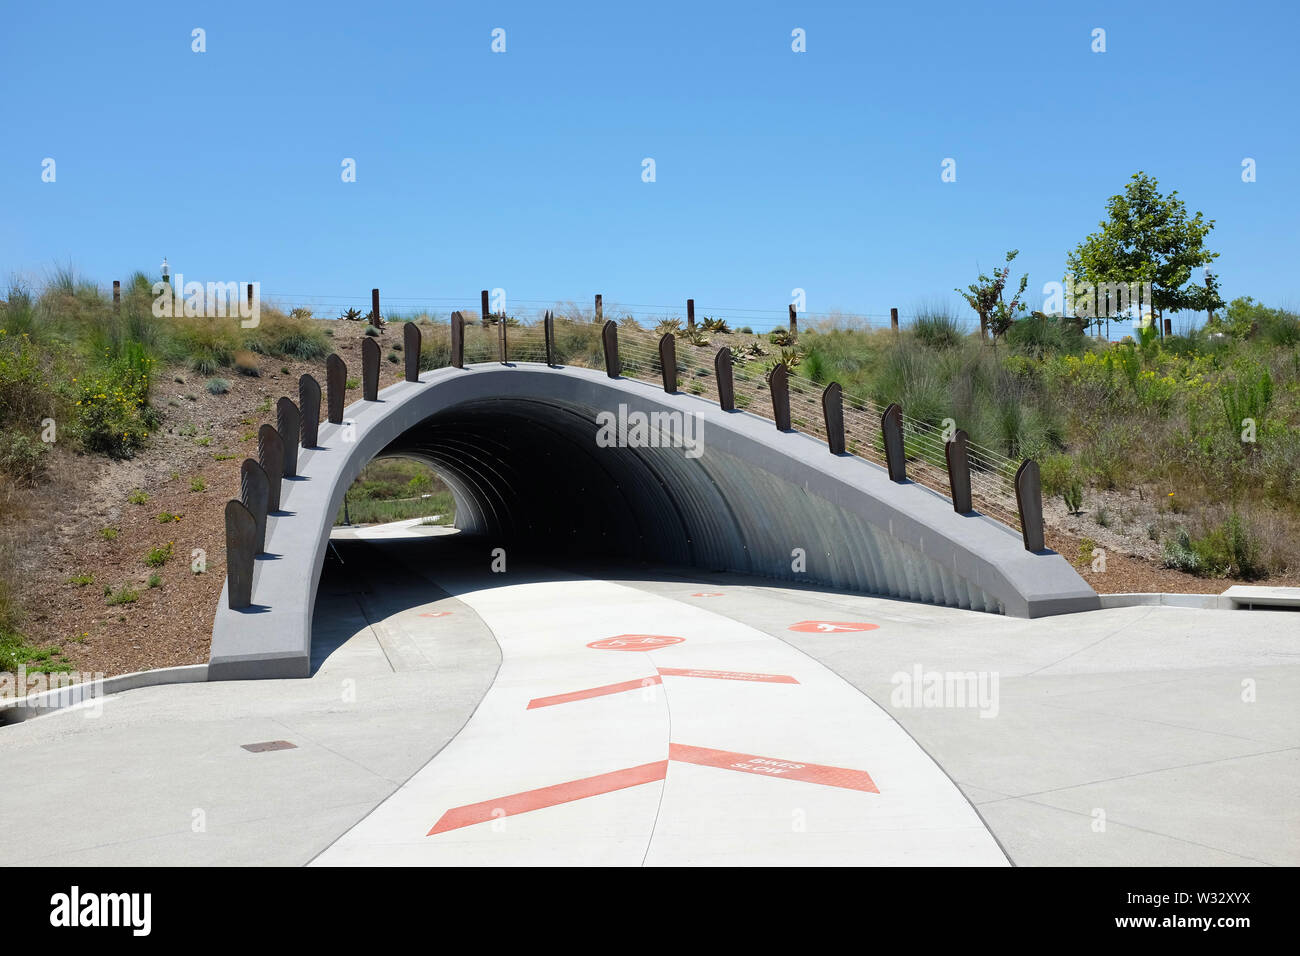 IRIVNE, CALIFORNIA - JULY 11, 2019: Benchmark Underpass in the Bosque Area of the Great Park open space trail system. Stock Photo